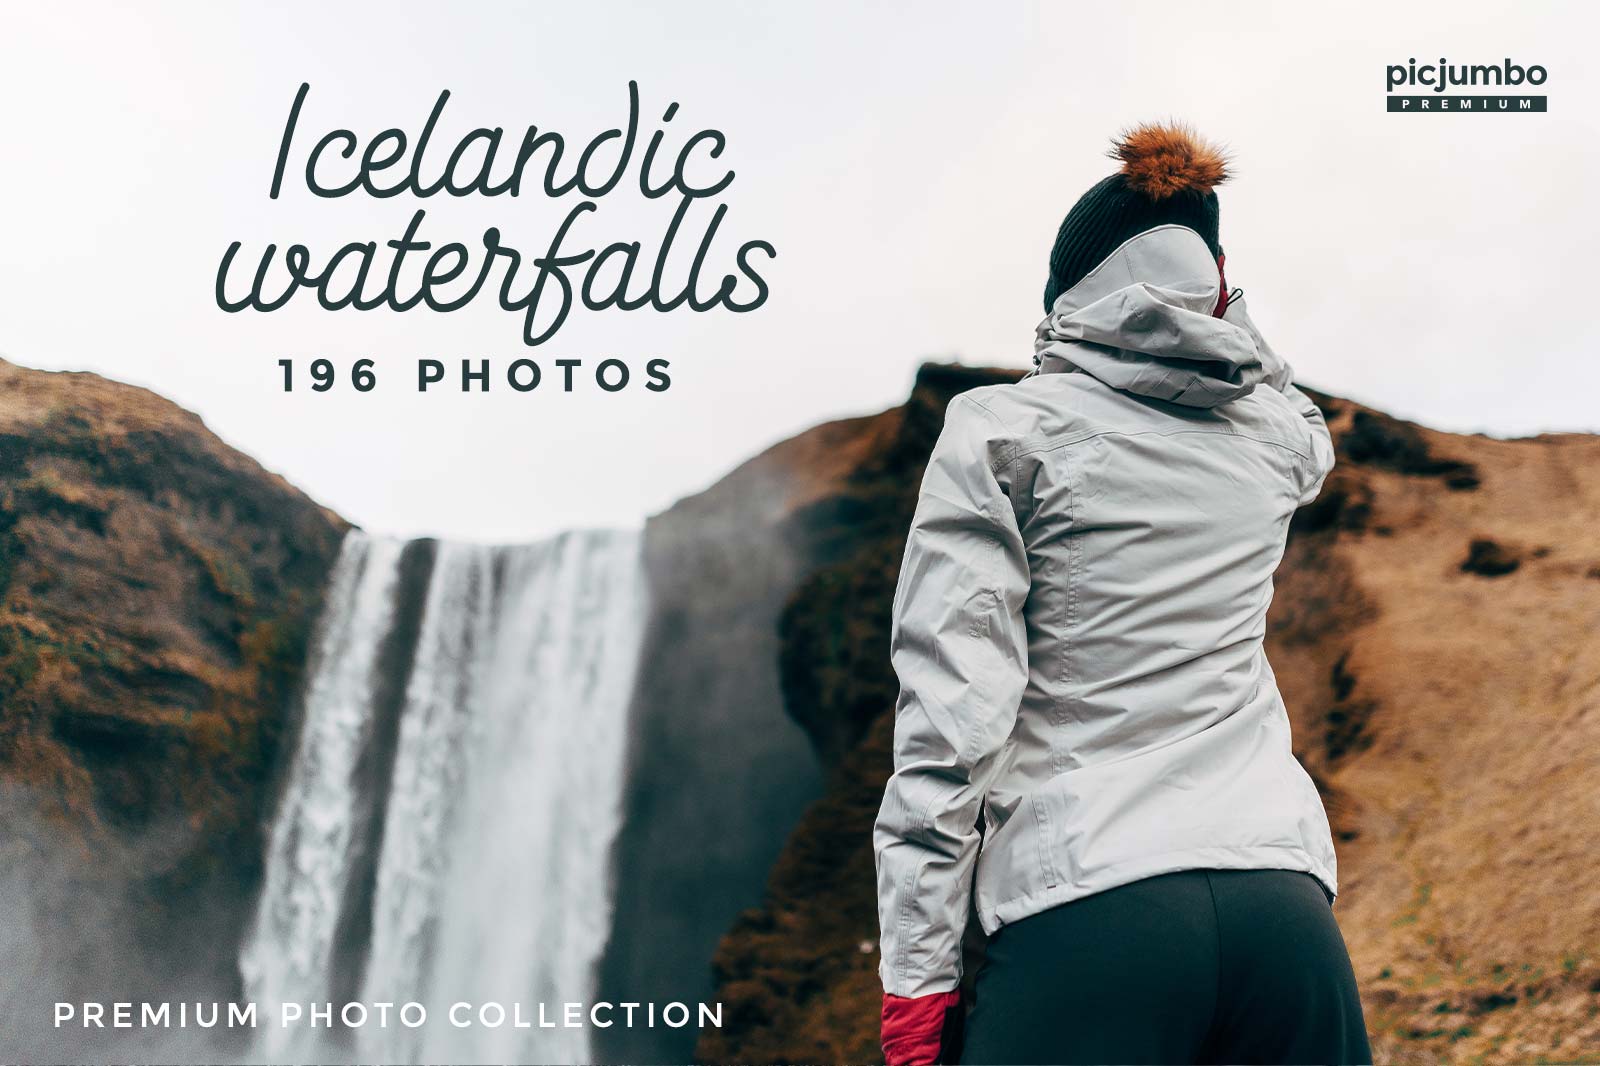 Download hi-res stock photos from our Icelandic Waterfalls PREMIUM Collection!